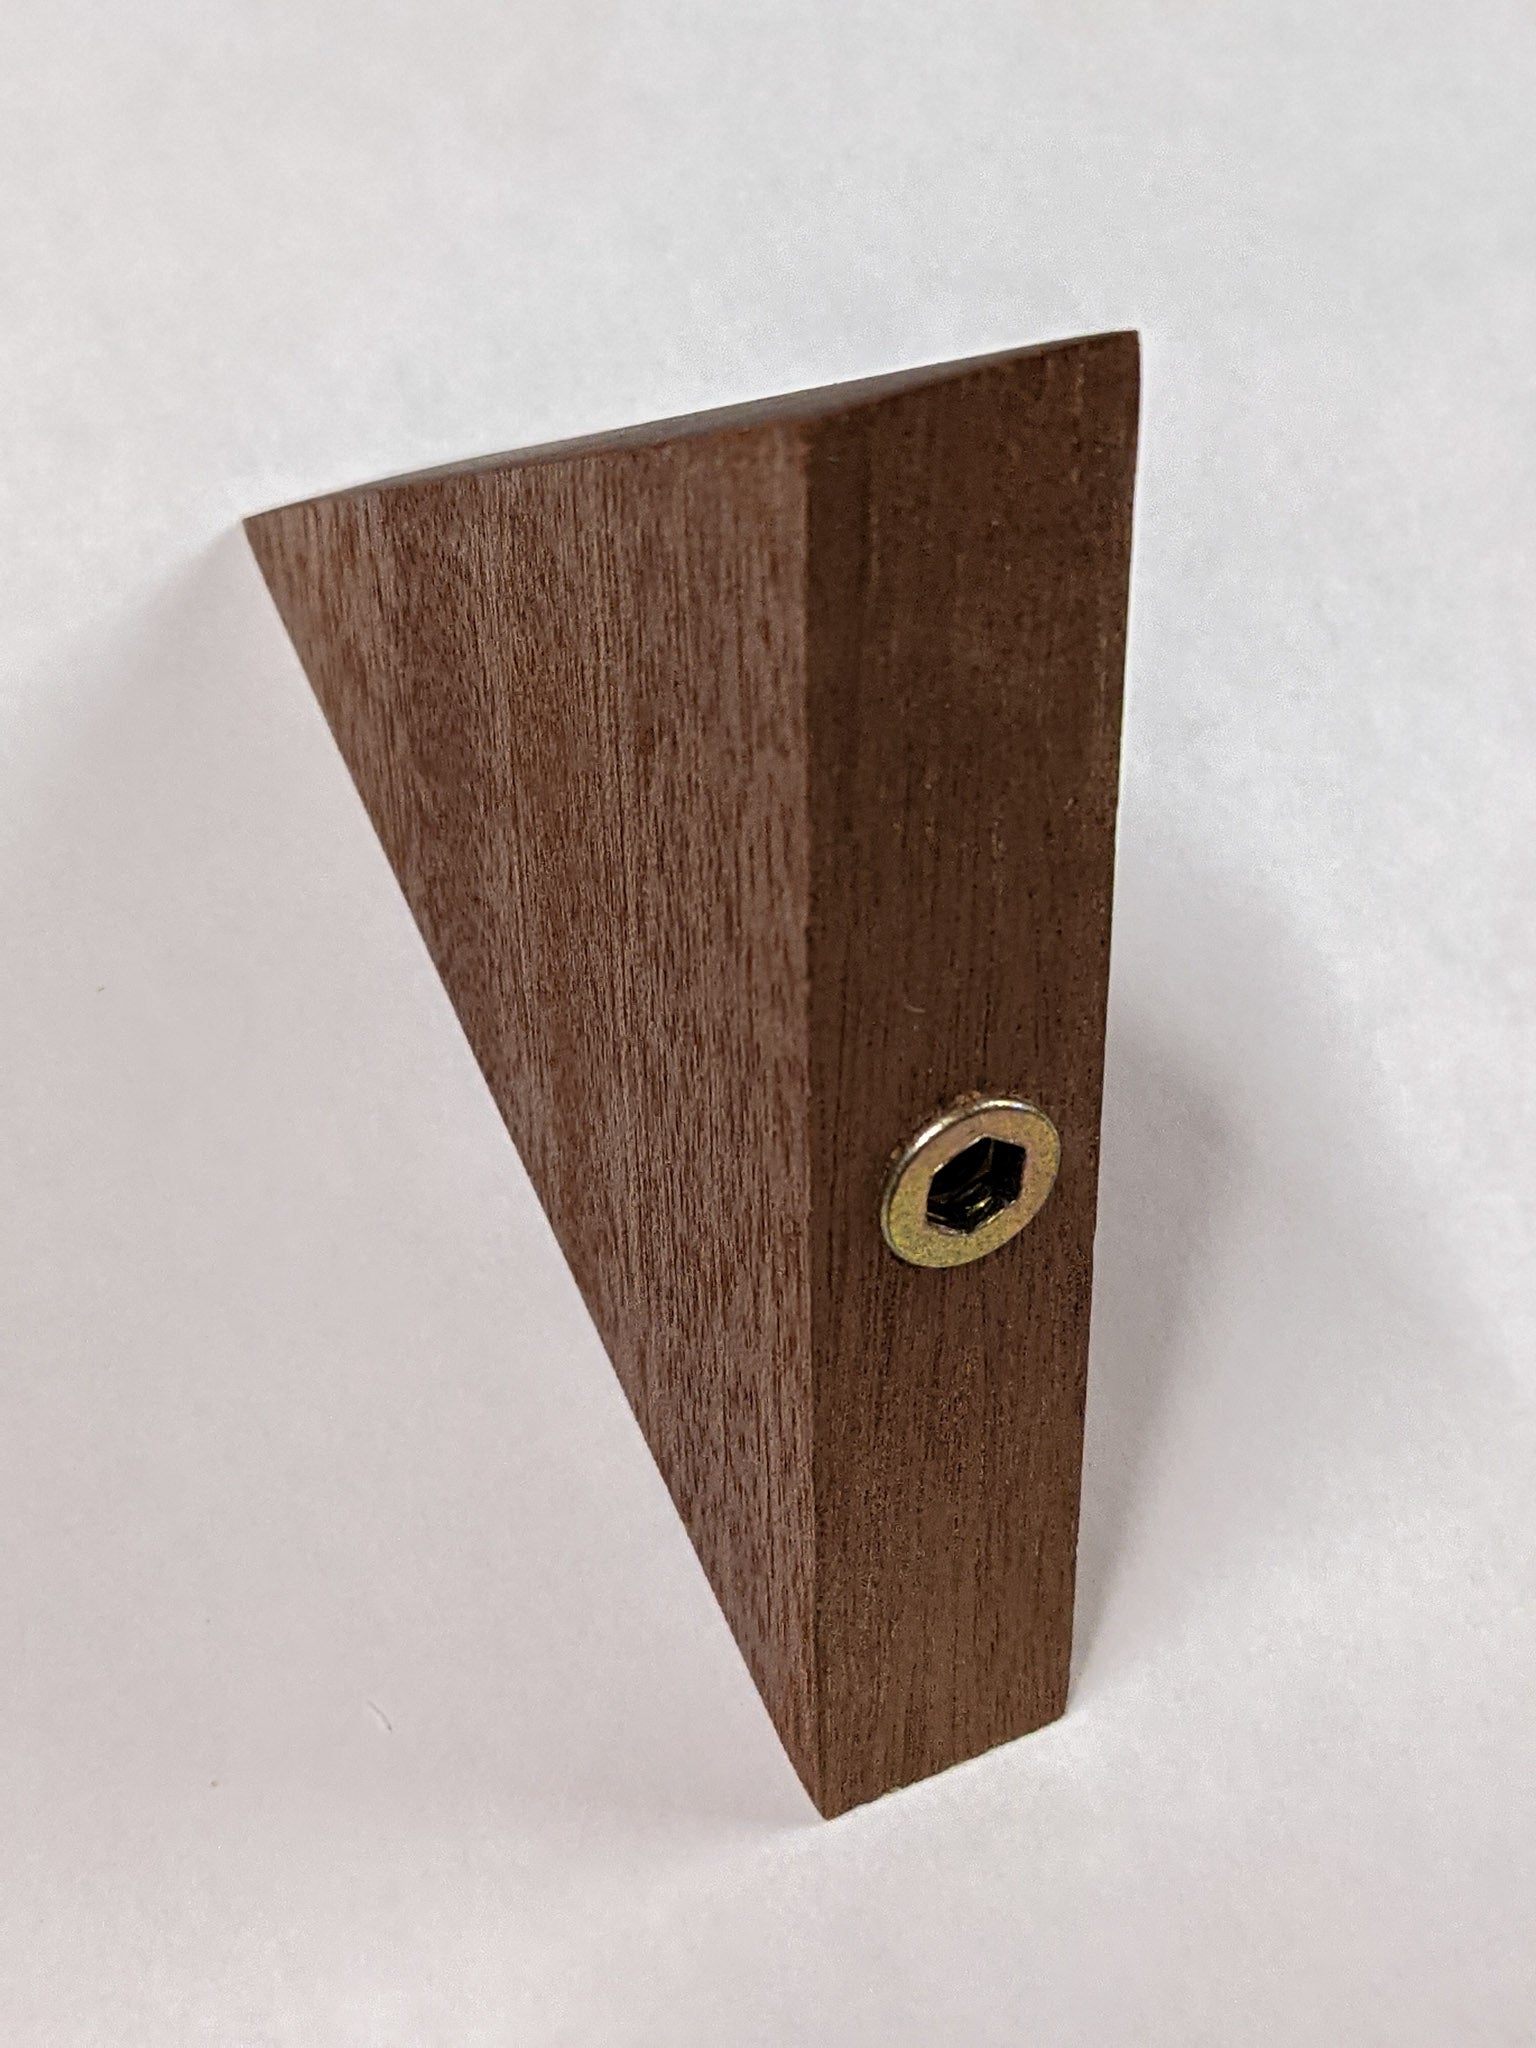 small triangle floating shelf with back exposed revealing where the hole the screw is screwed into.